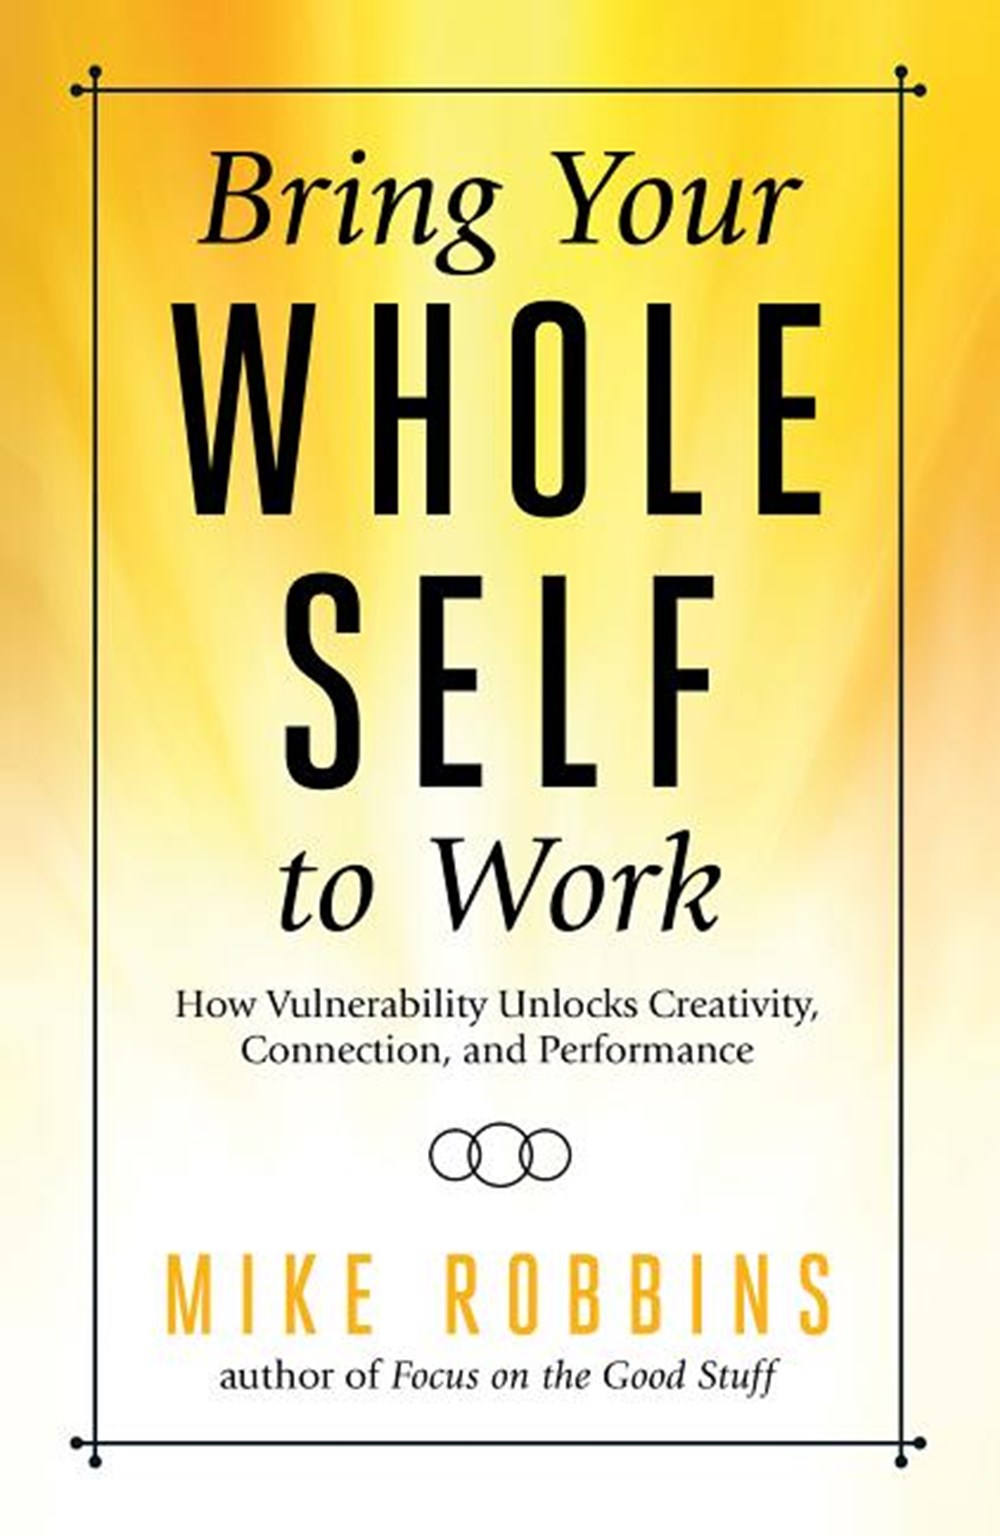 Bring Your Whole Self to Work How Vulnerability Unlocks Creativity, Connection, and Performance